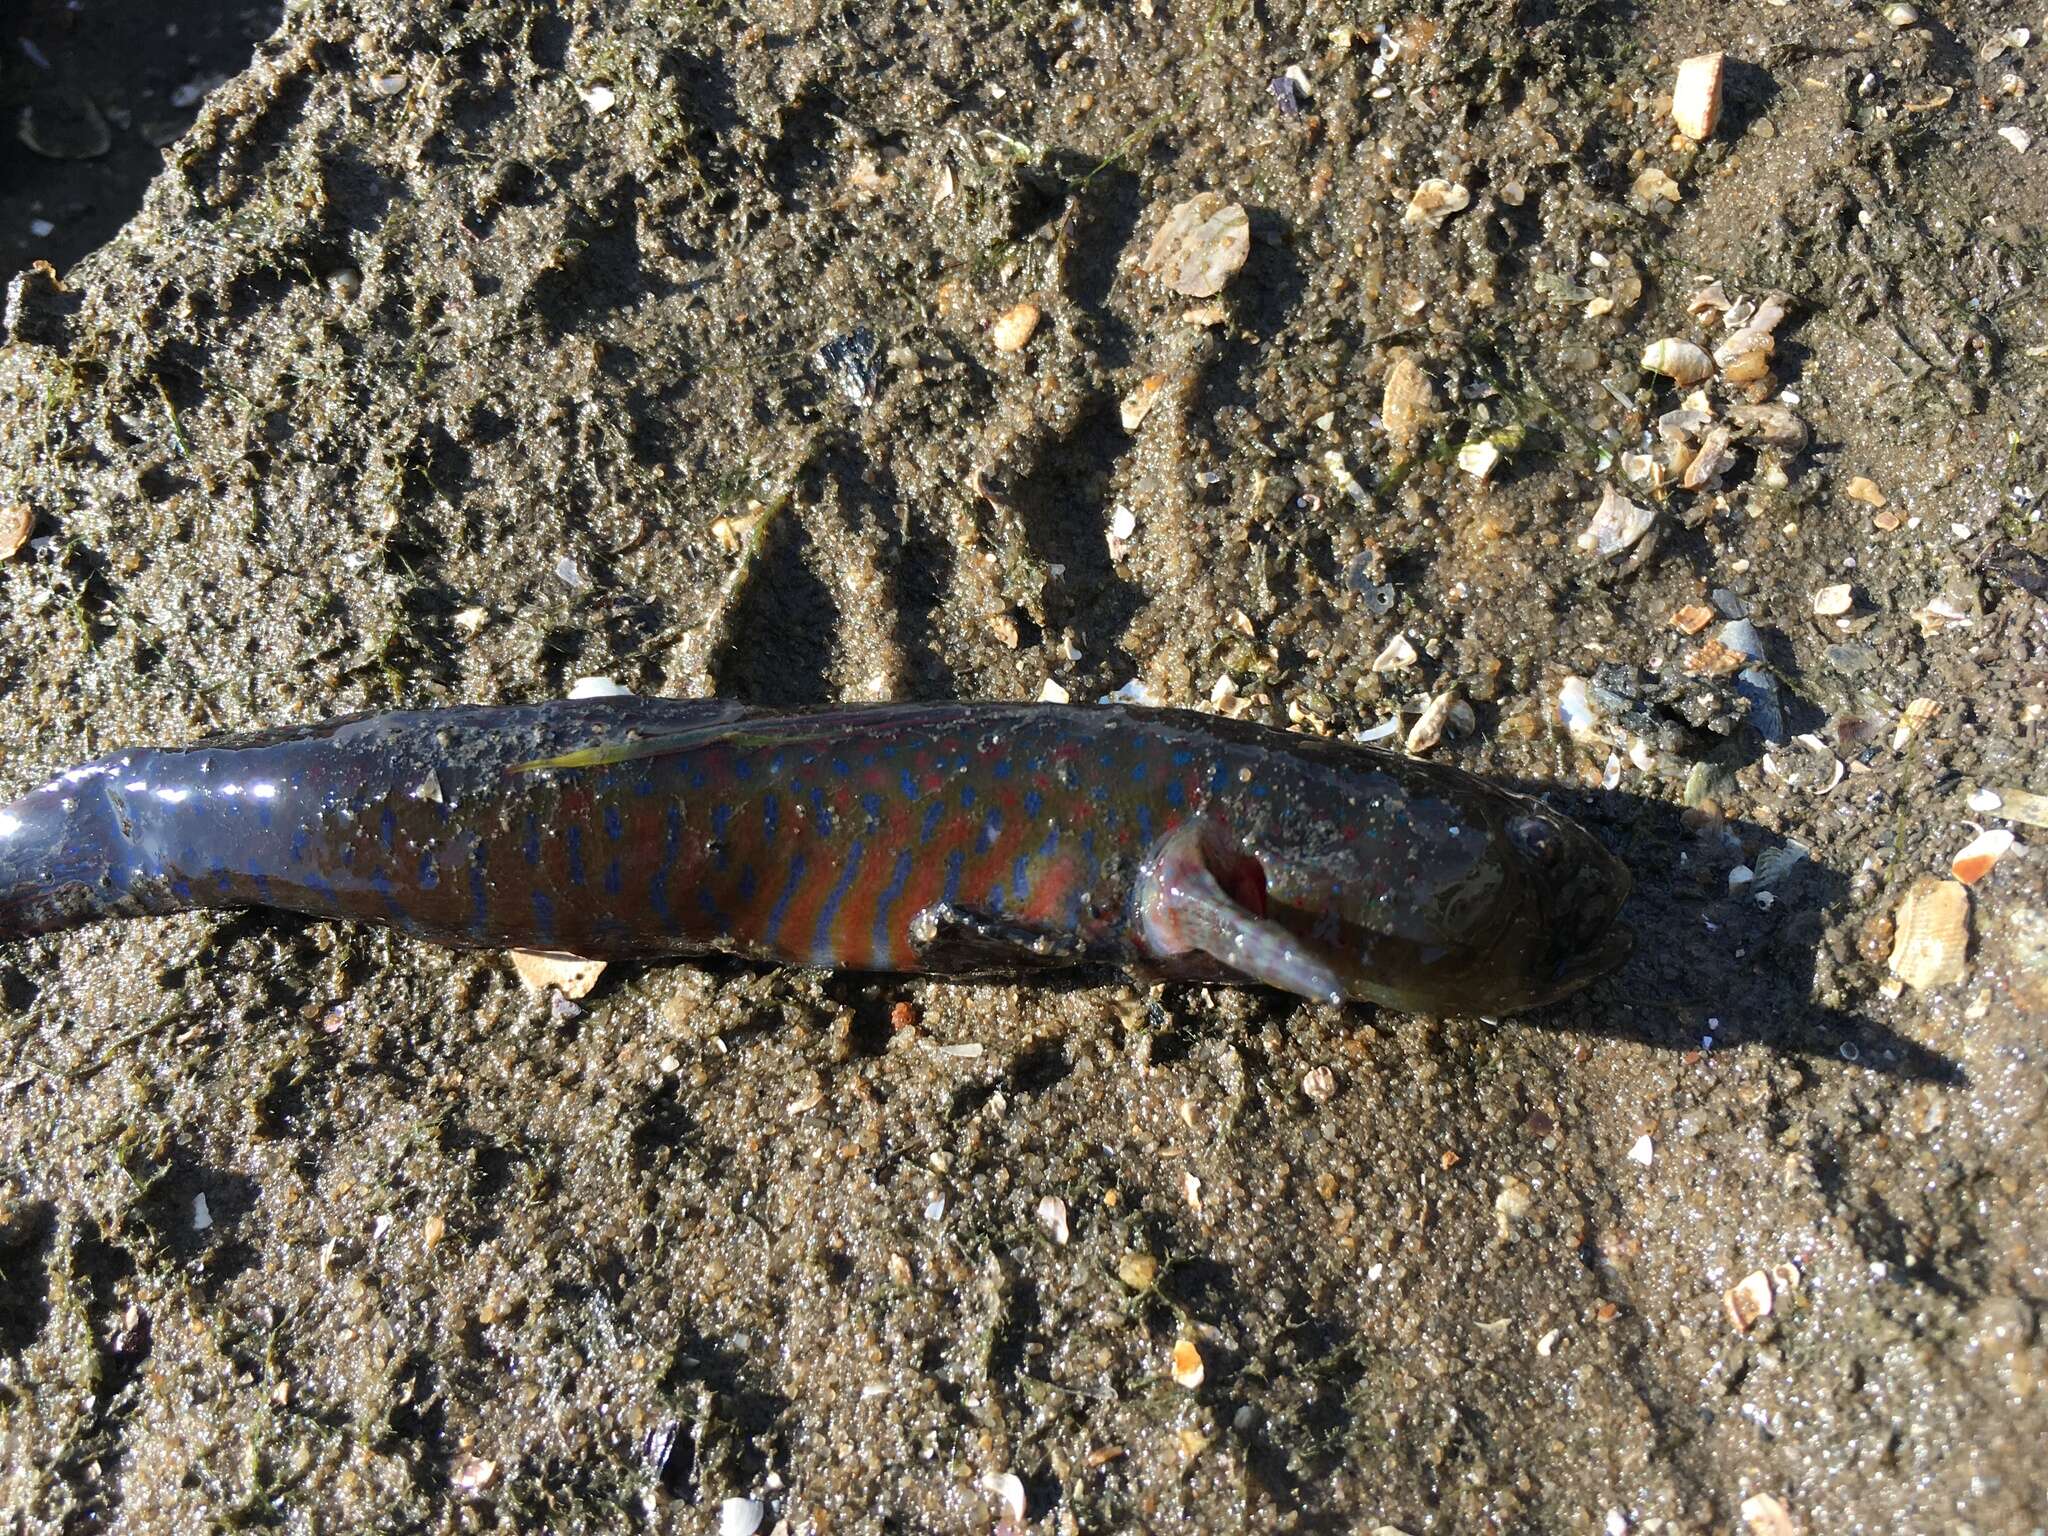 Image of Crested oystergoby